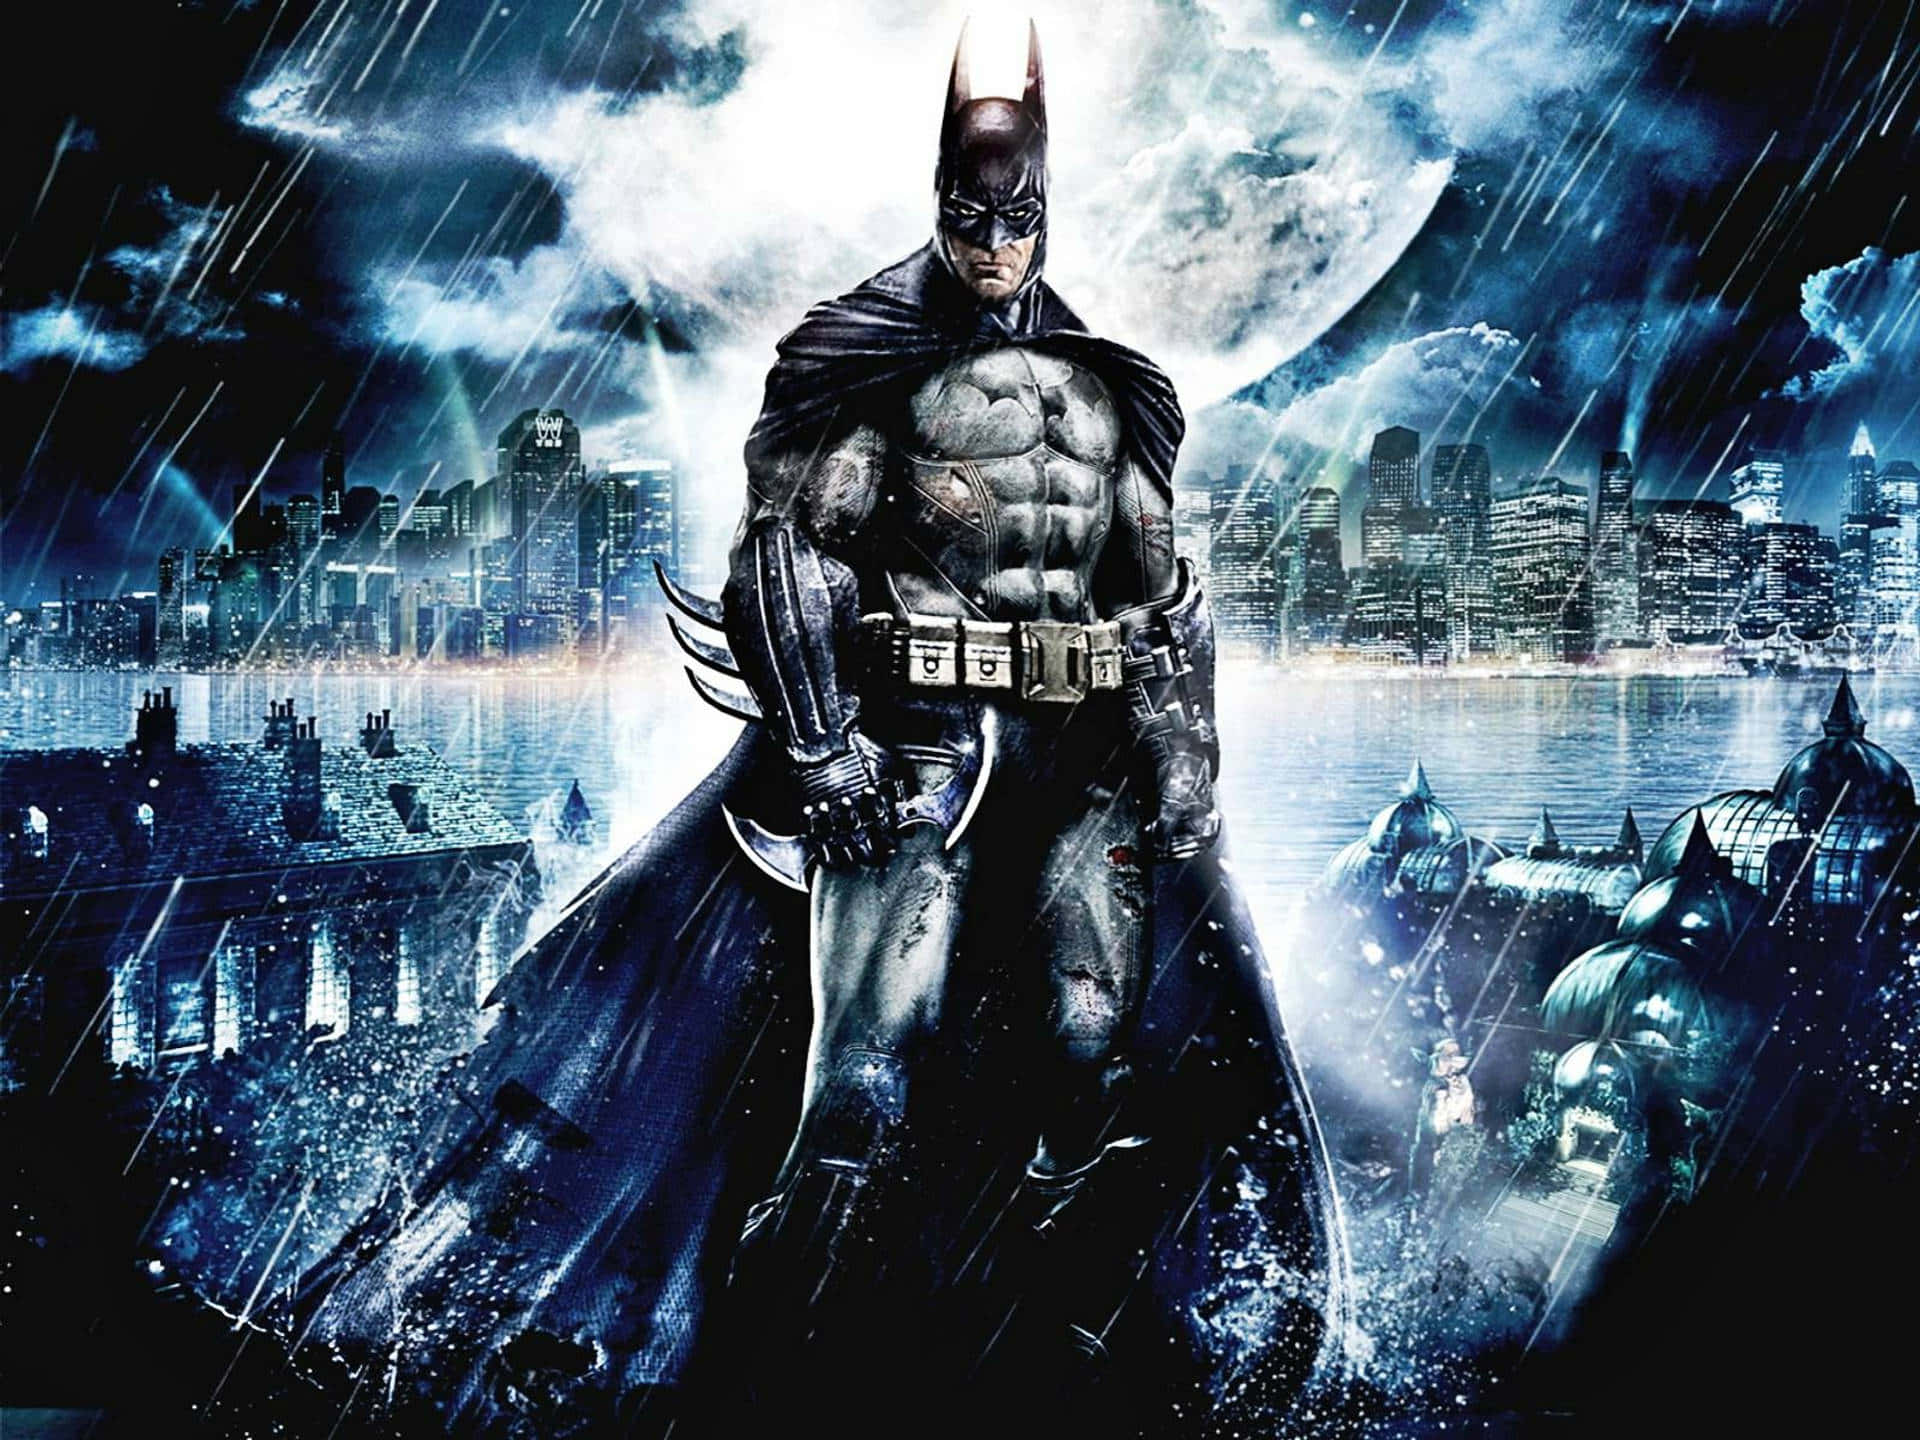 Divulge in the Awesome World of Batman. Wallpaper